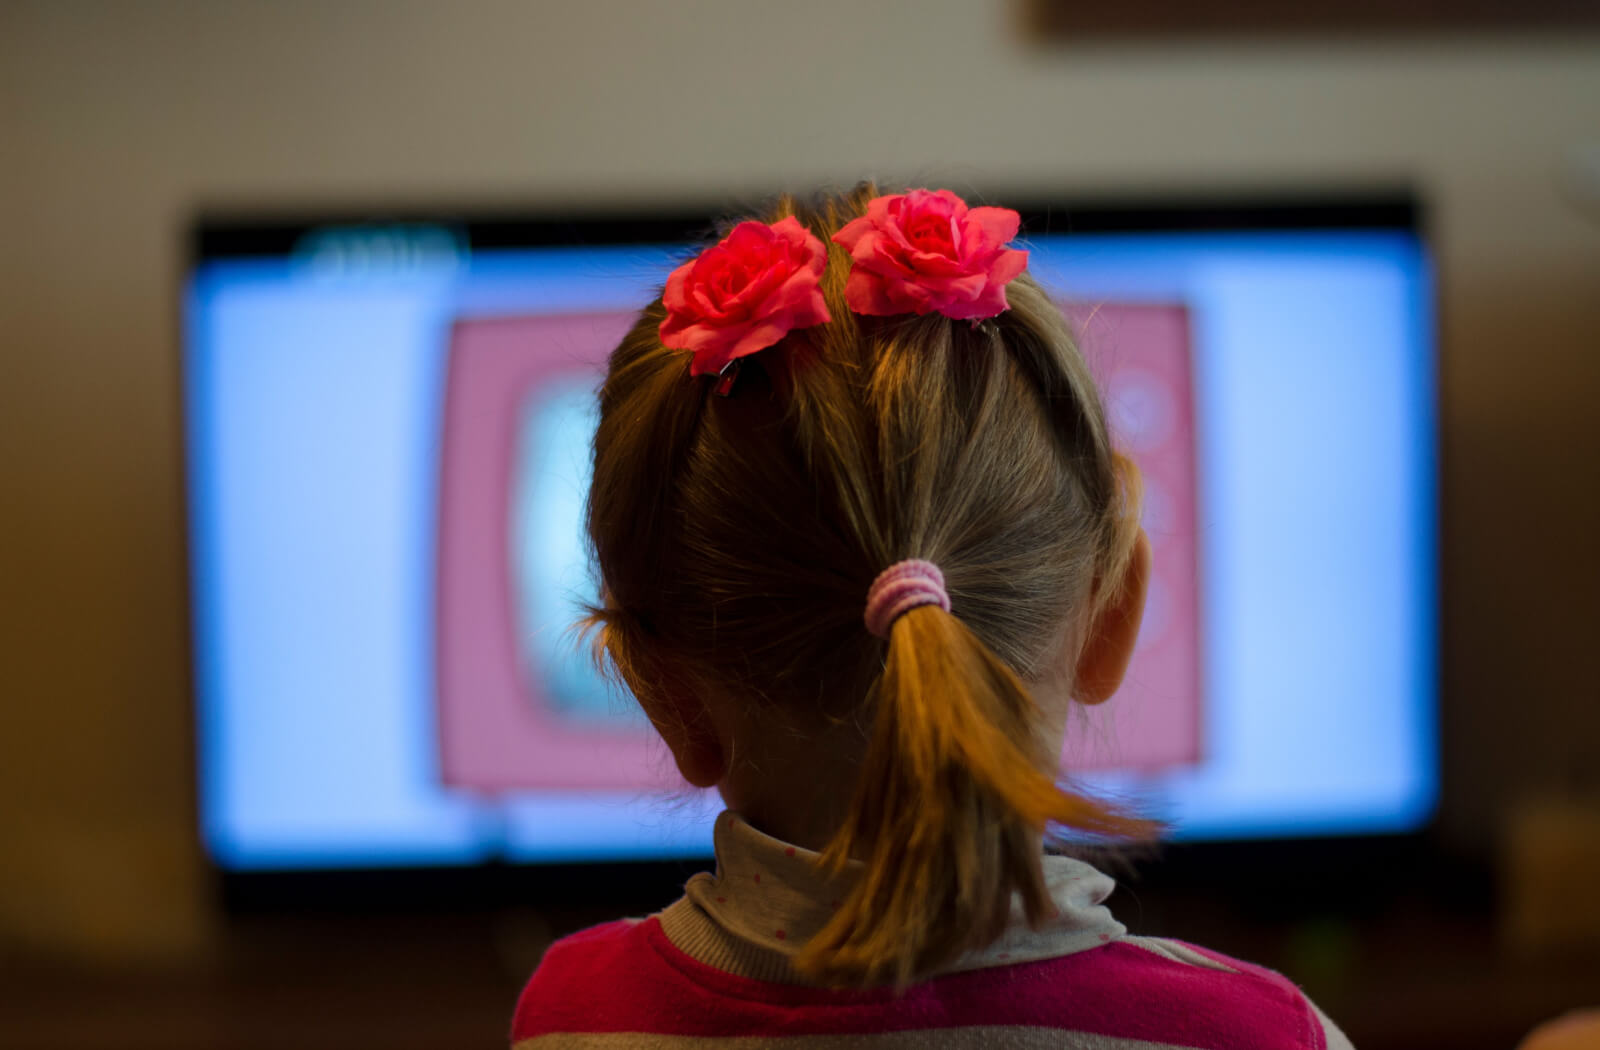 A young girl sitting close to the television screen at home watching cartoons is a sign of myopia. Myopia control glasses can help correct myopia.